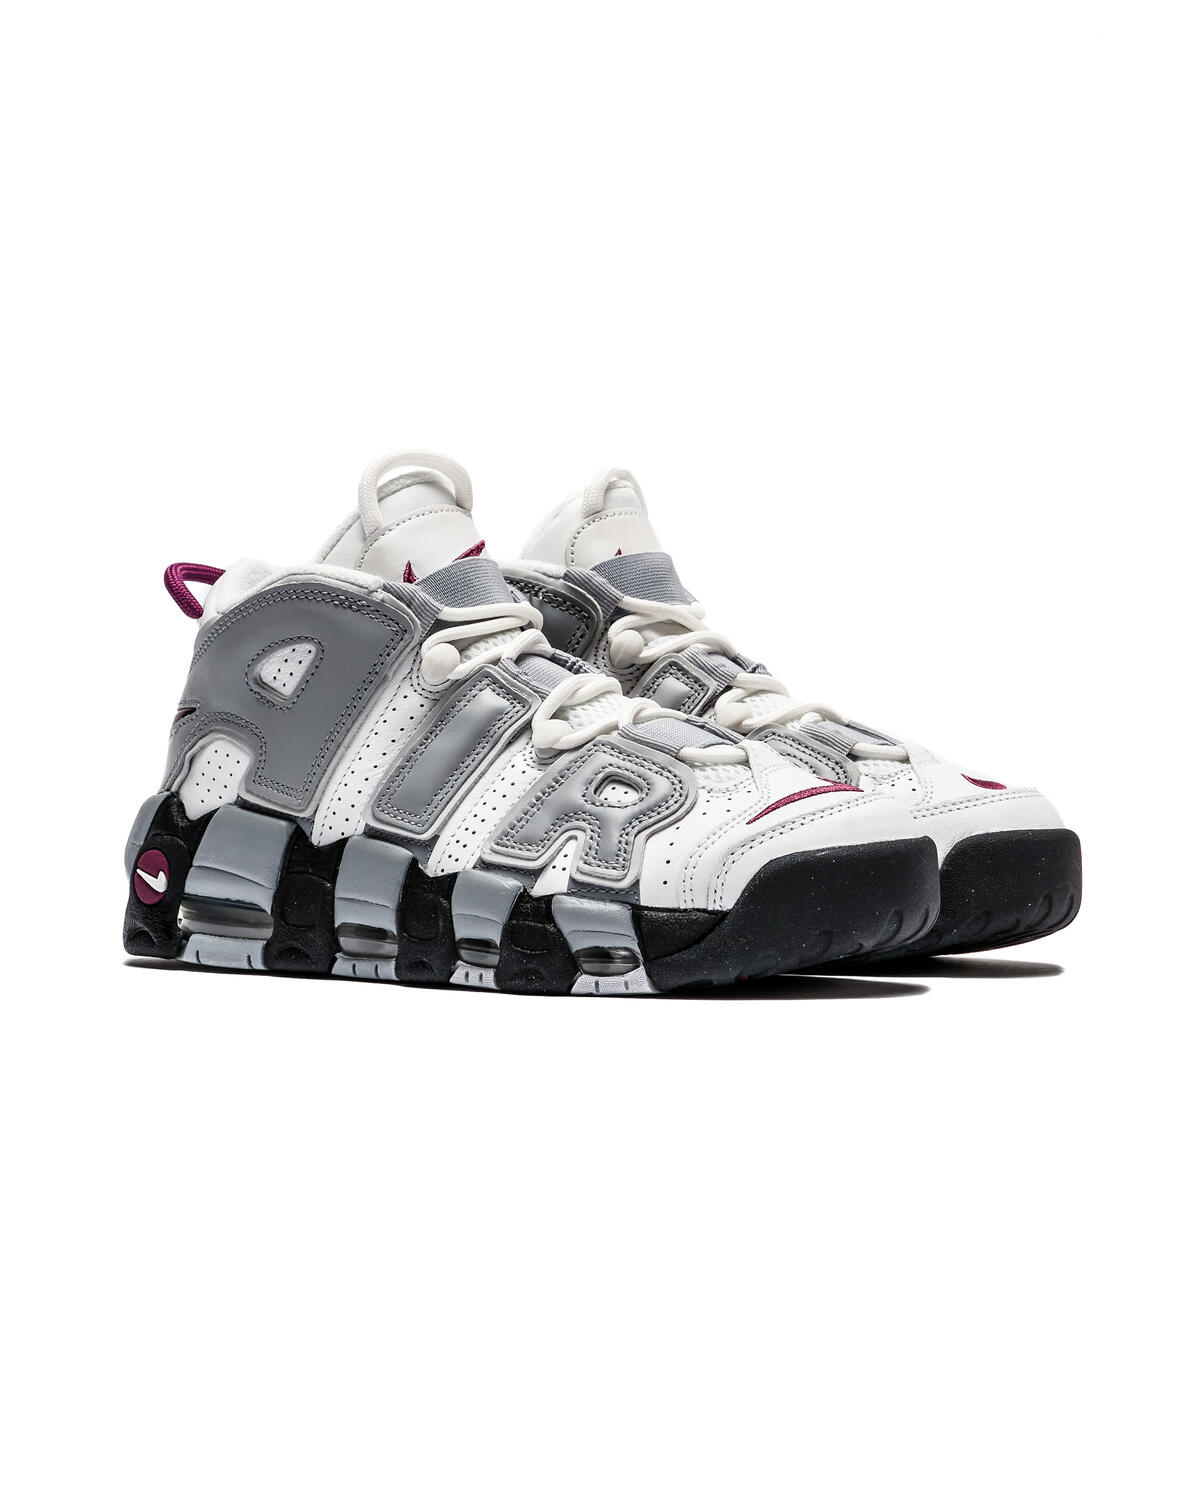 AmaflightschoolShops STORE | Nike WMNS AIR MORE UPTEMPO | nike